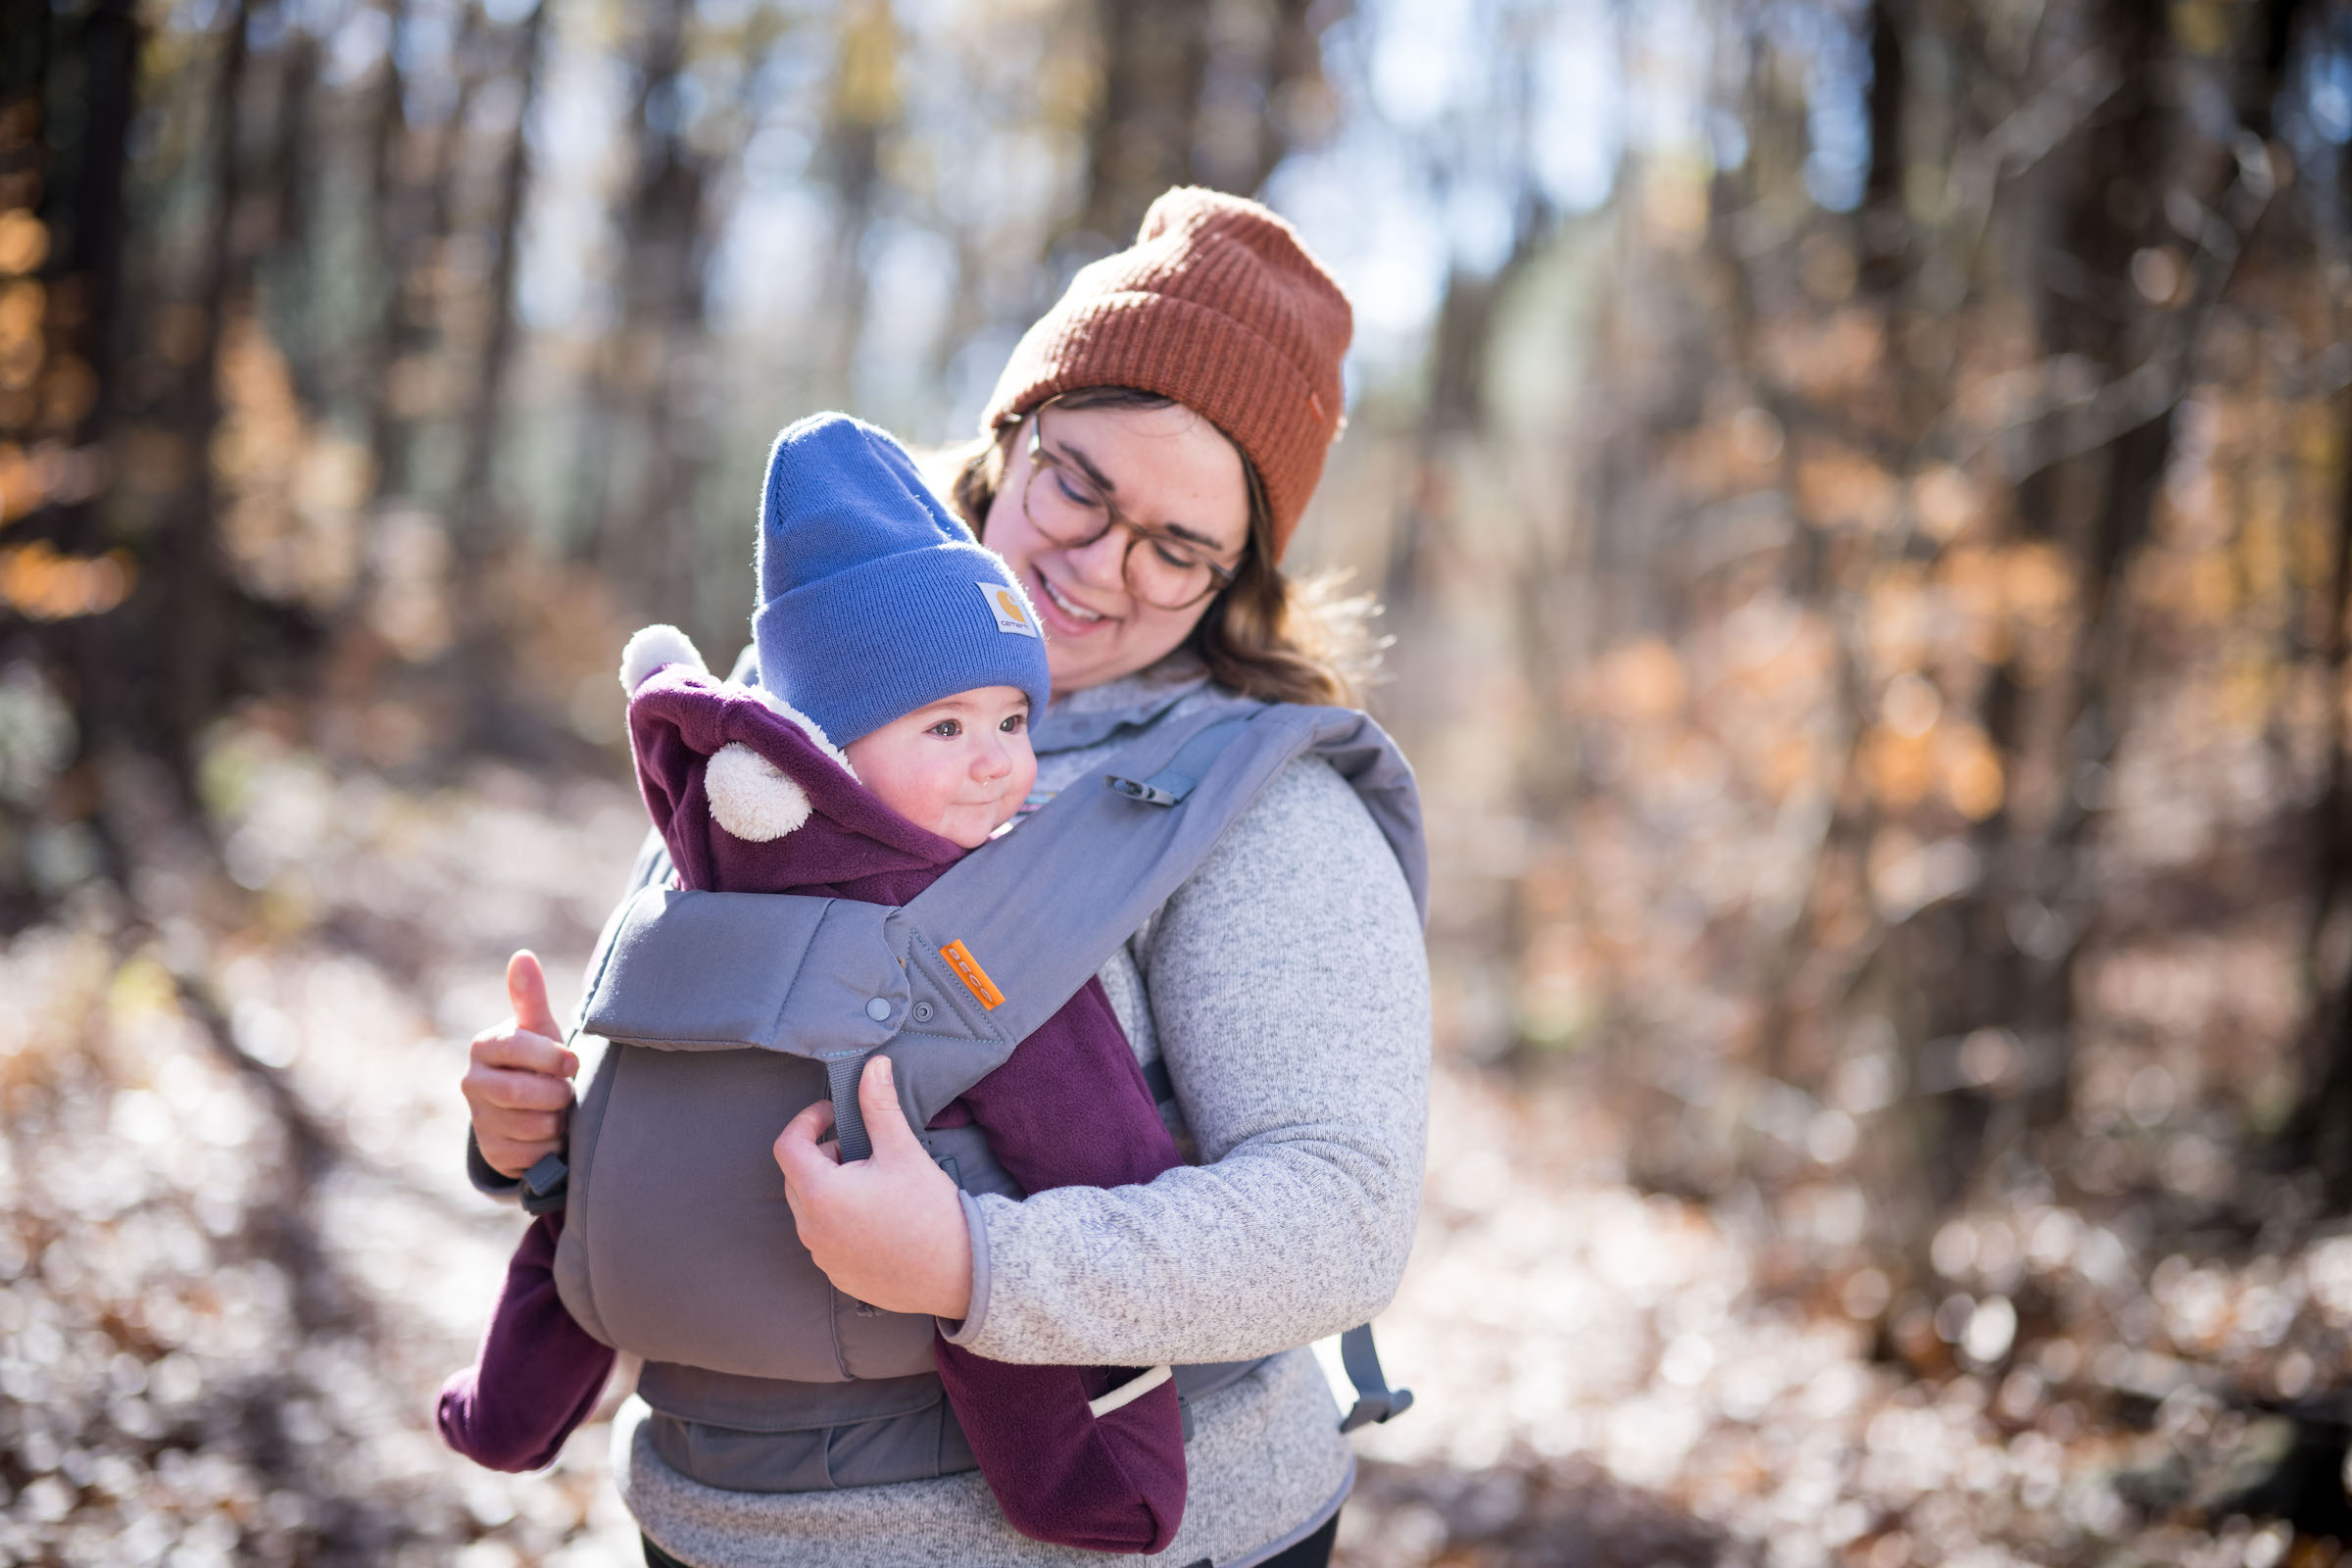 A baby is held in a front sling. (photo © Ben Conant)